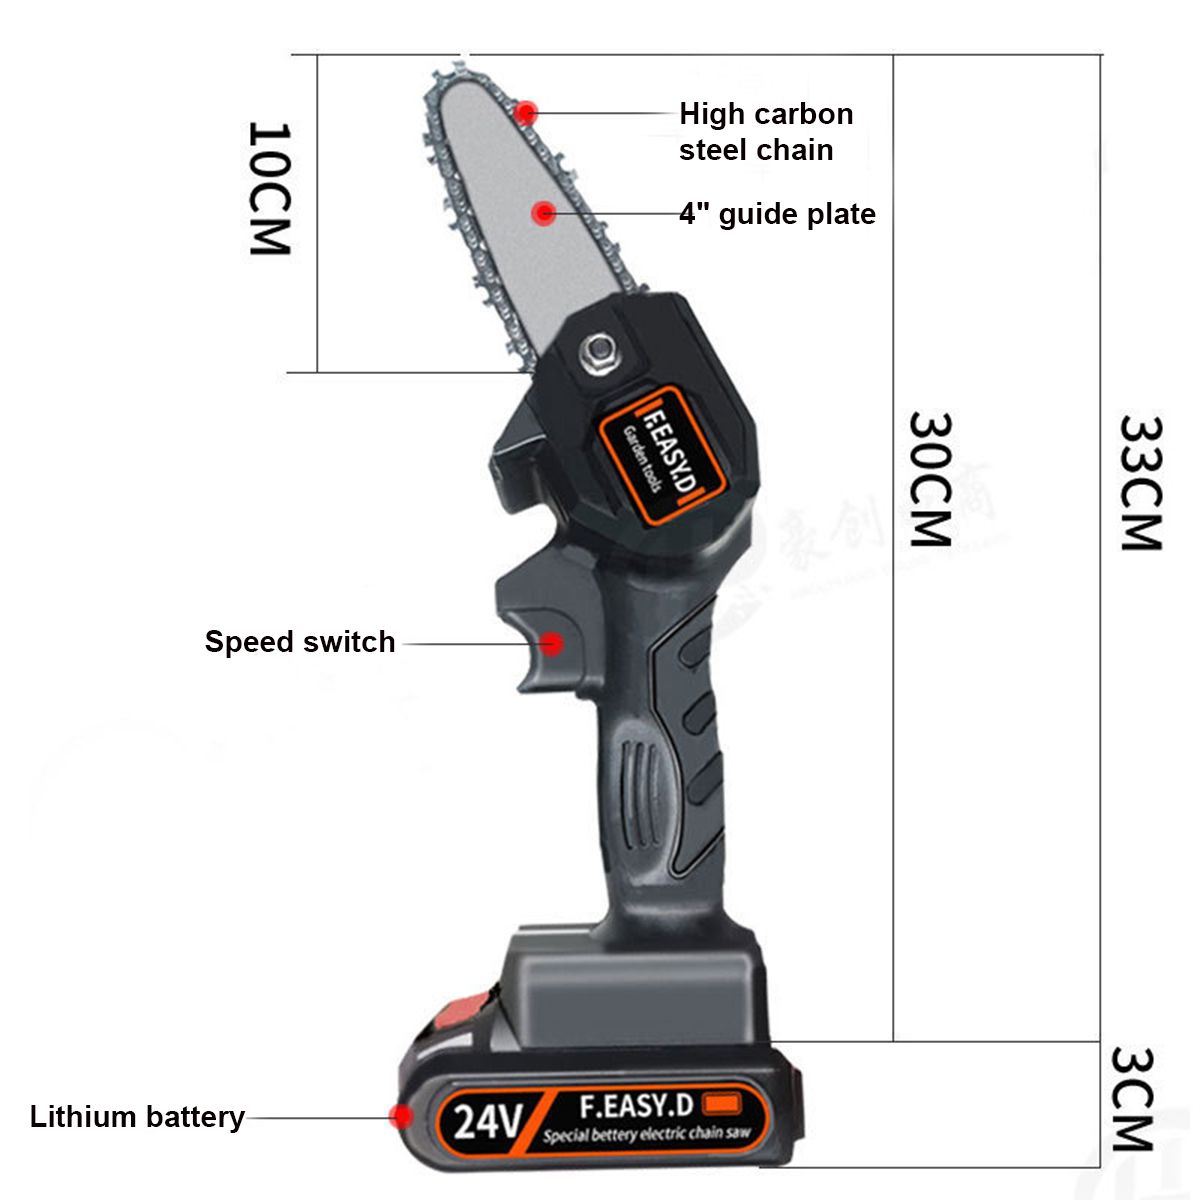 24V-Rechargeable-Cordless-Electric-Saw-Portable-Woodworking-Cutting-Tool-W-Battery-1740320